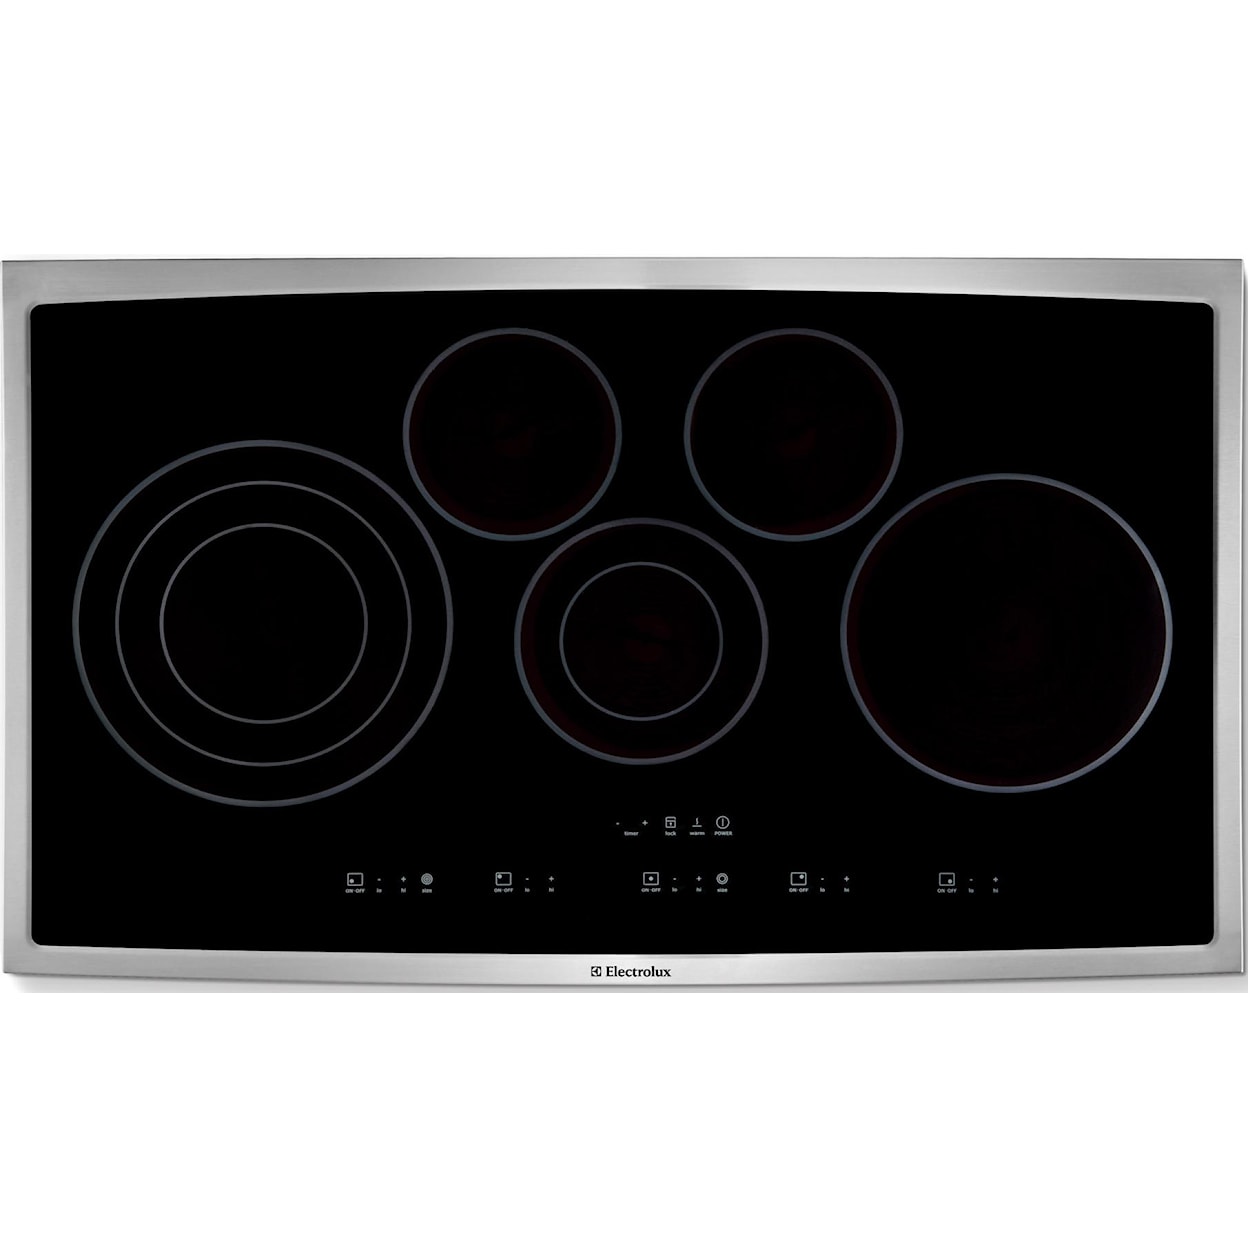 Electrolux Electric Cooktops 36" Drop-In Electric Cooktop